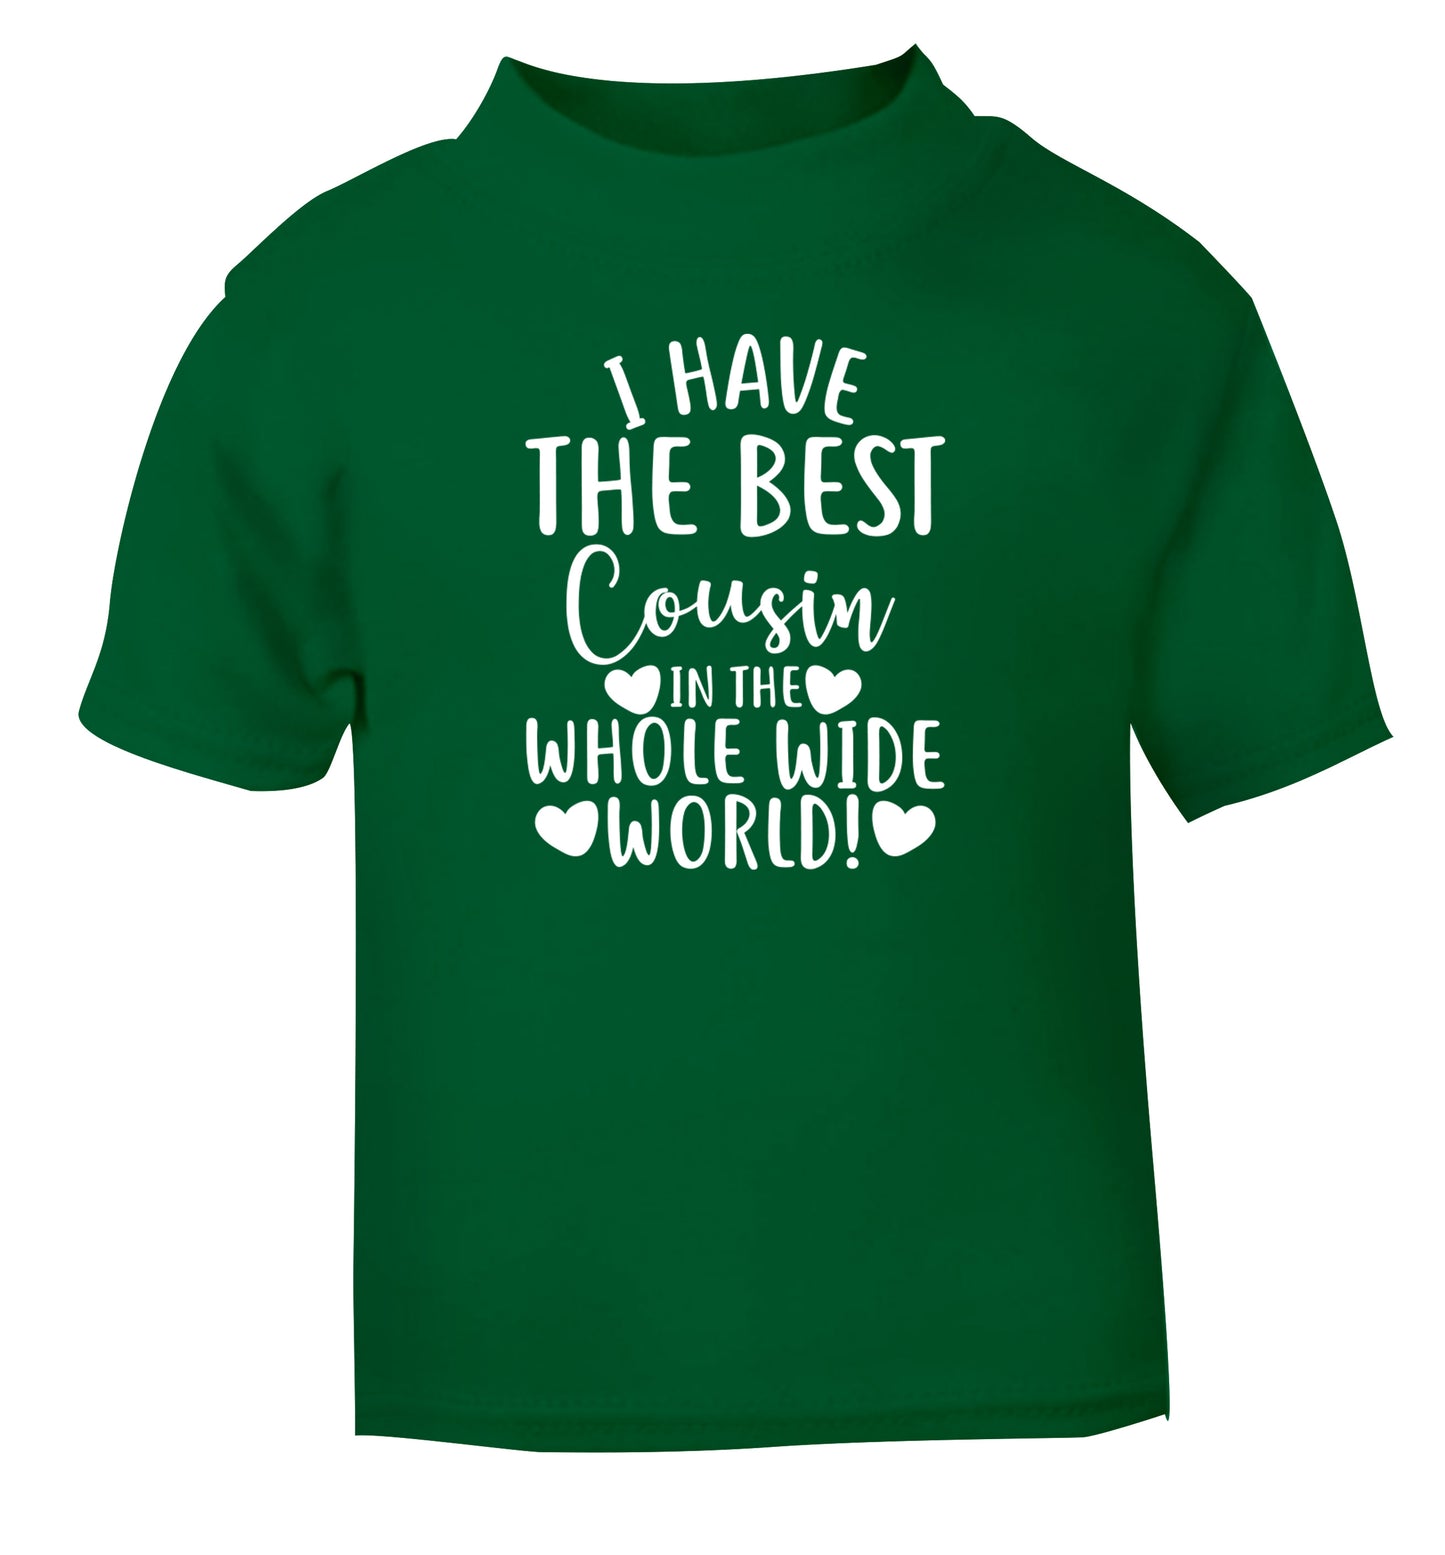 I have the best cousin in the whole wide world! green Baby Toddler Tshirt 2 Years